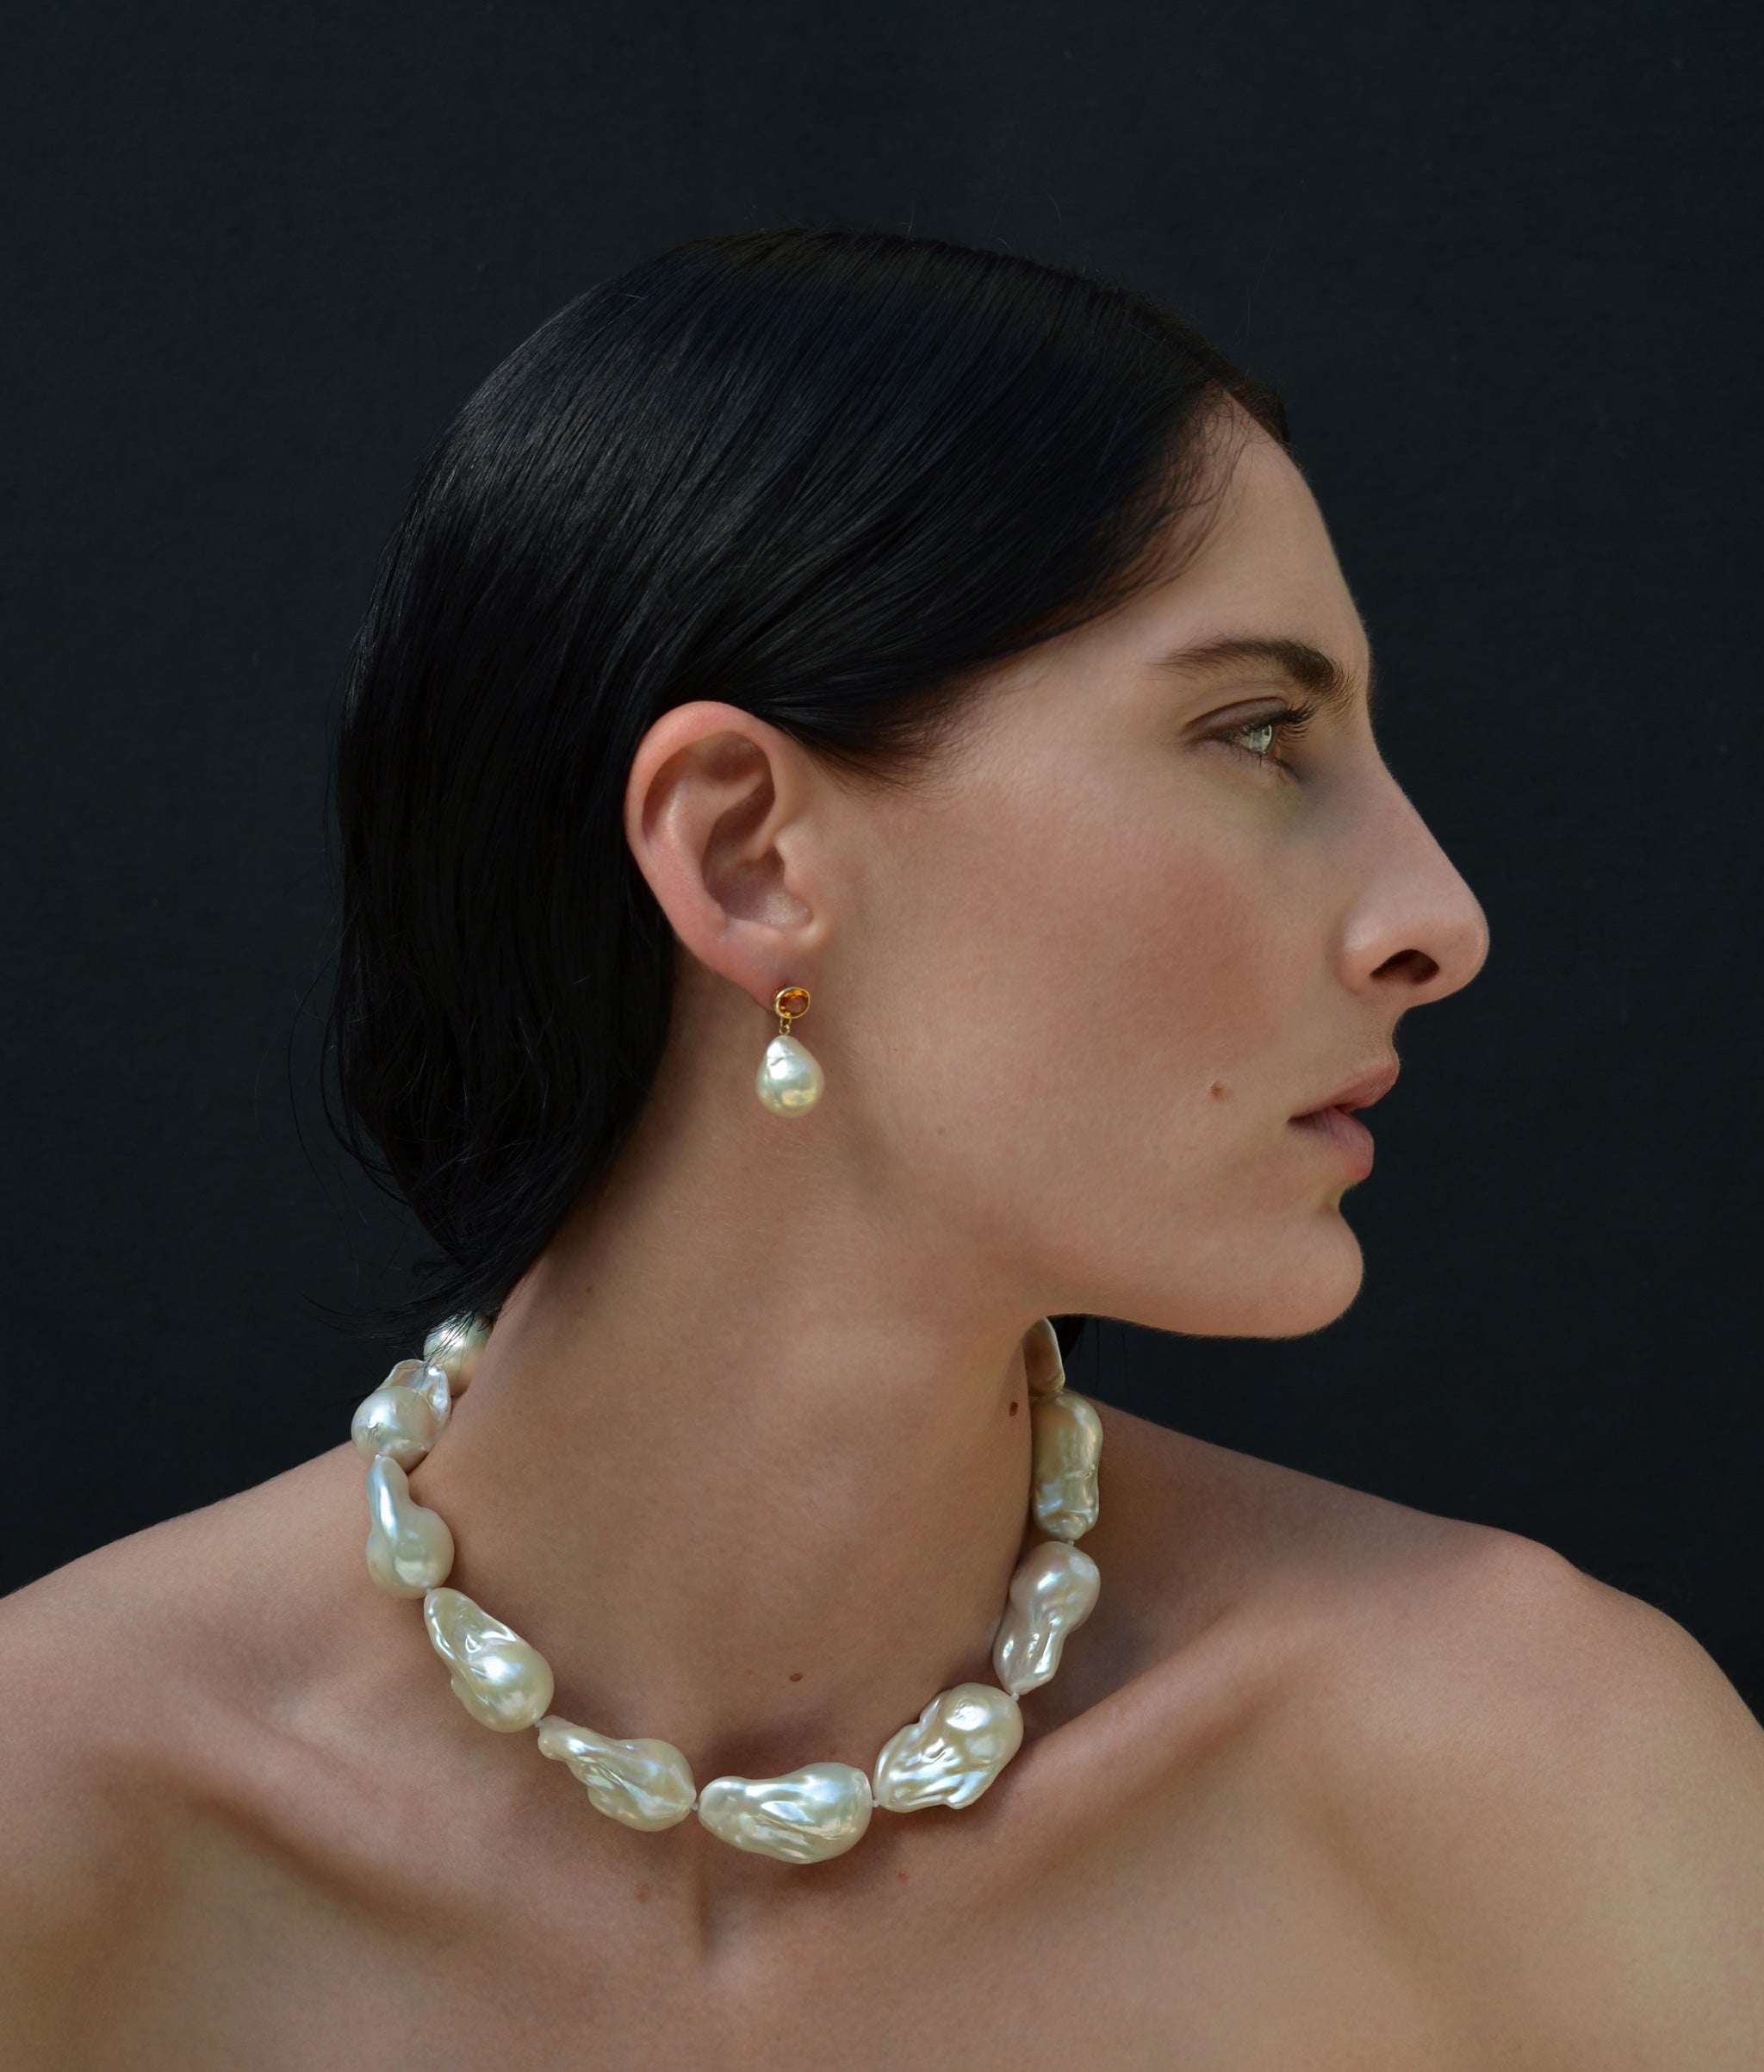 Model in profile on black backdrop wears Extra Large White Baroque Pearl Necklace with pearl earrings